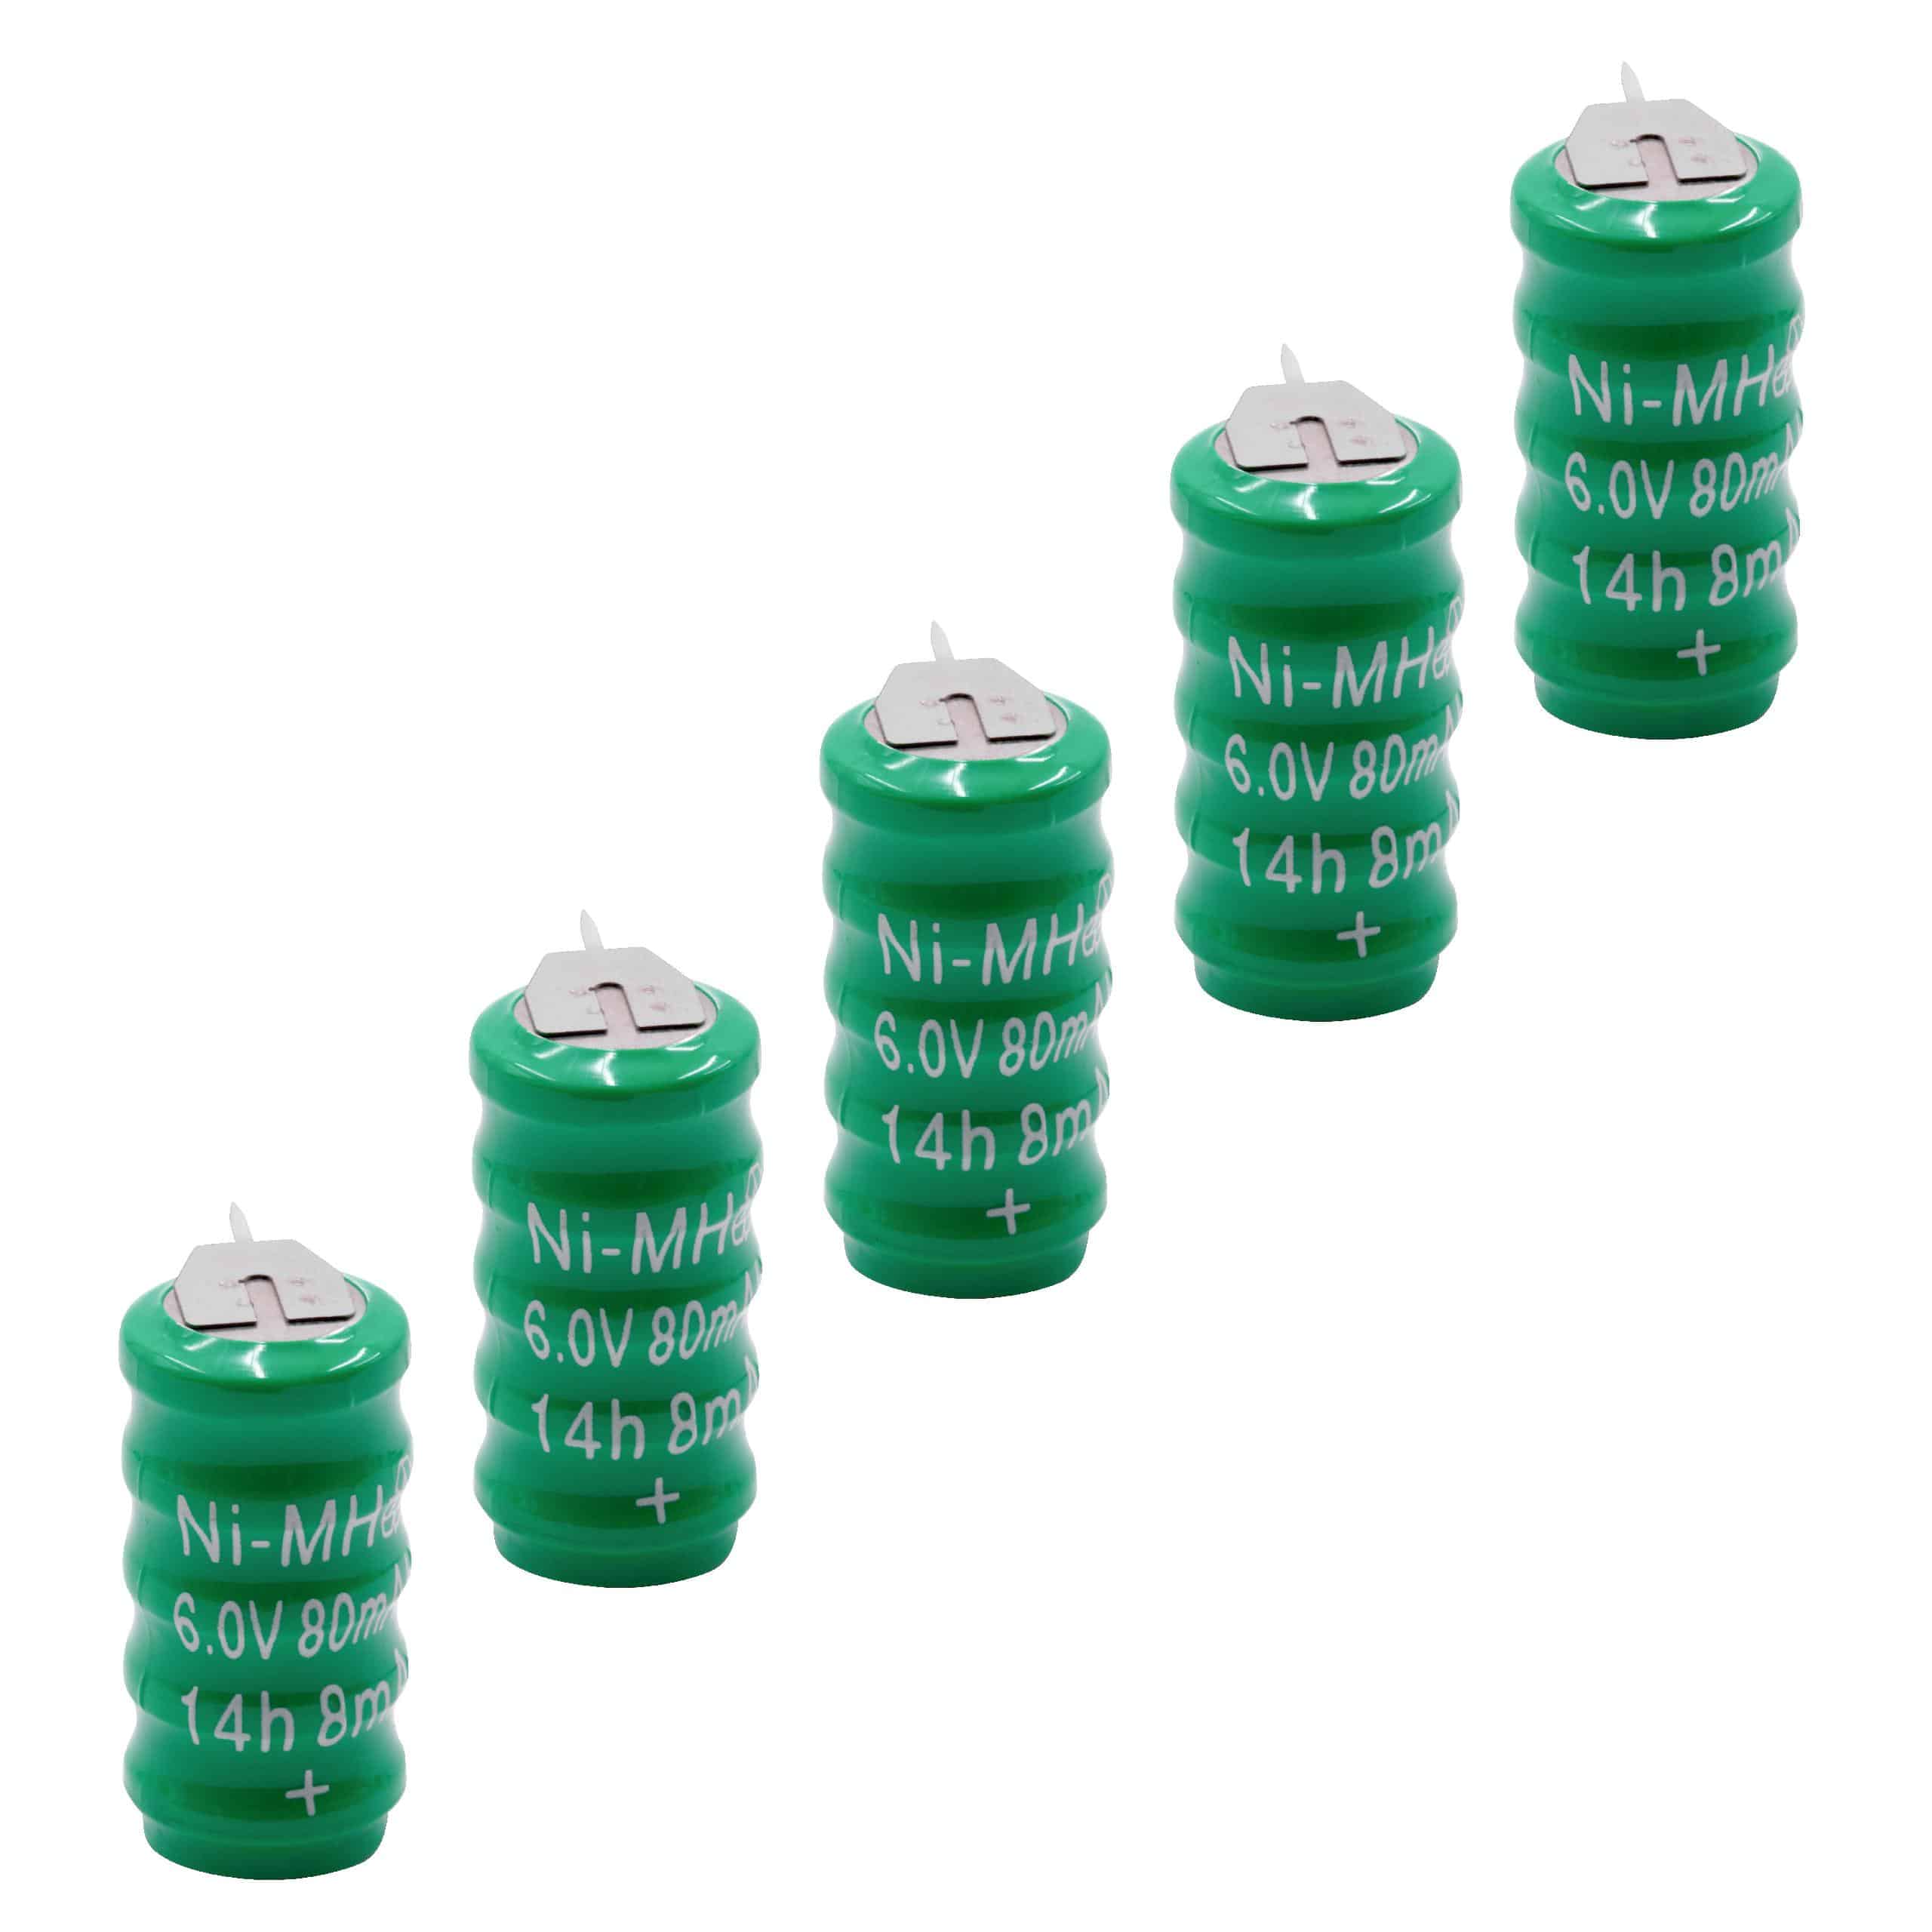 5x Button Cell Battery (5x Cell) Type V80H 3 Pins for Model Building Solar Lamps etc. - 80mAh 6V NiMH